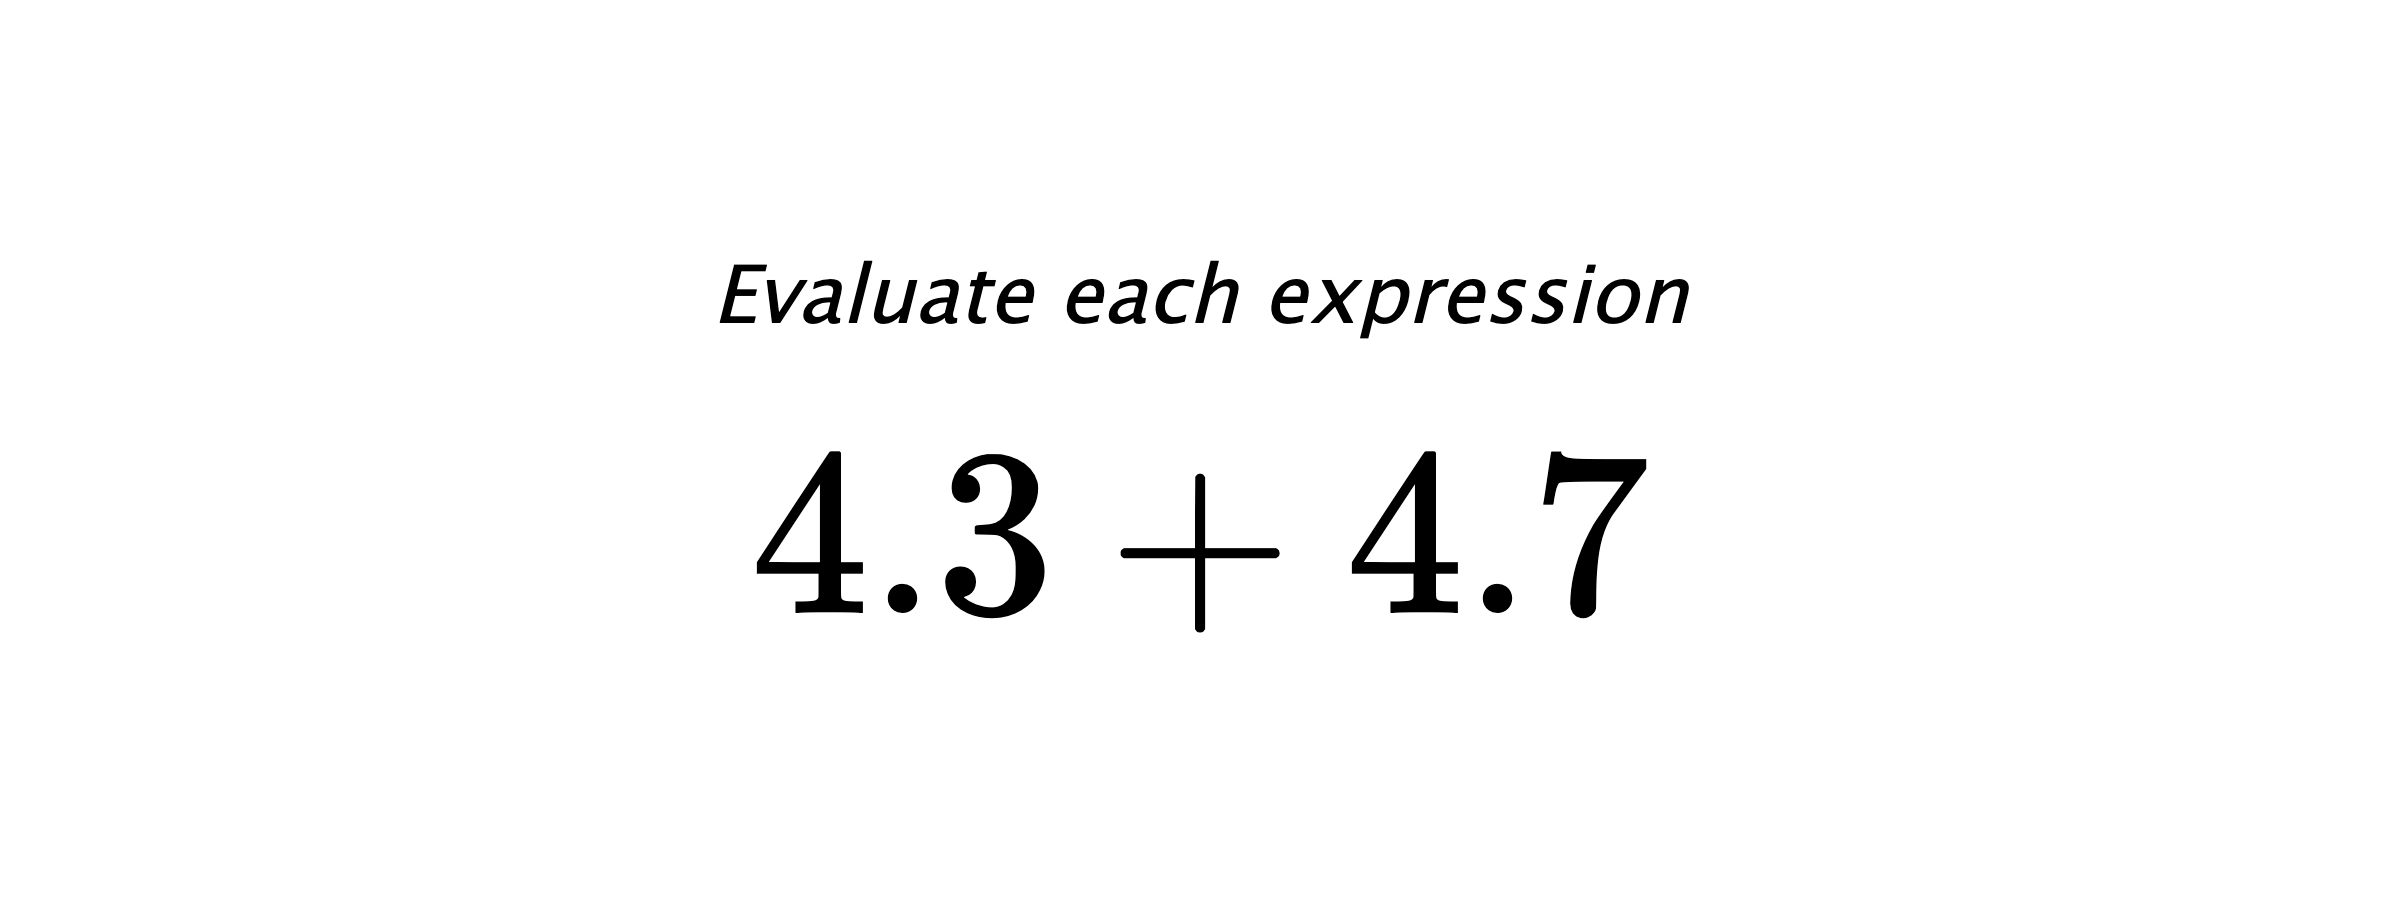 Evaluate each expression $ 4.3+4.7 $